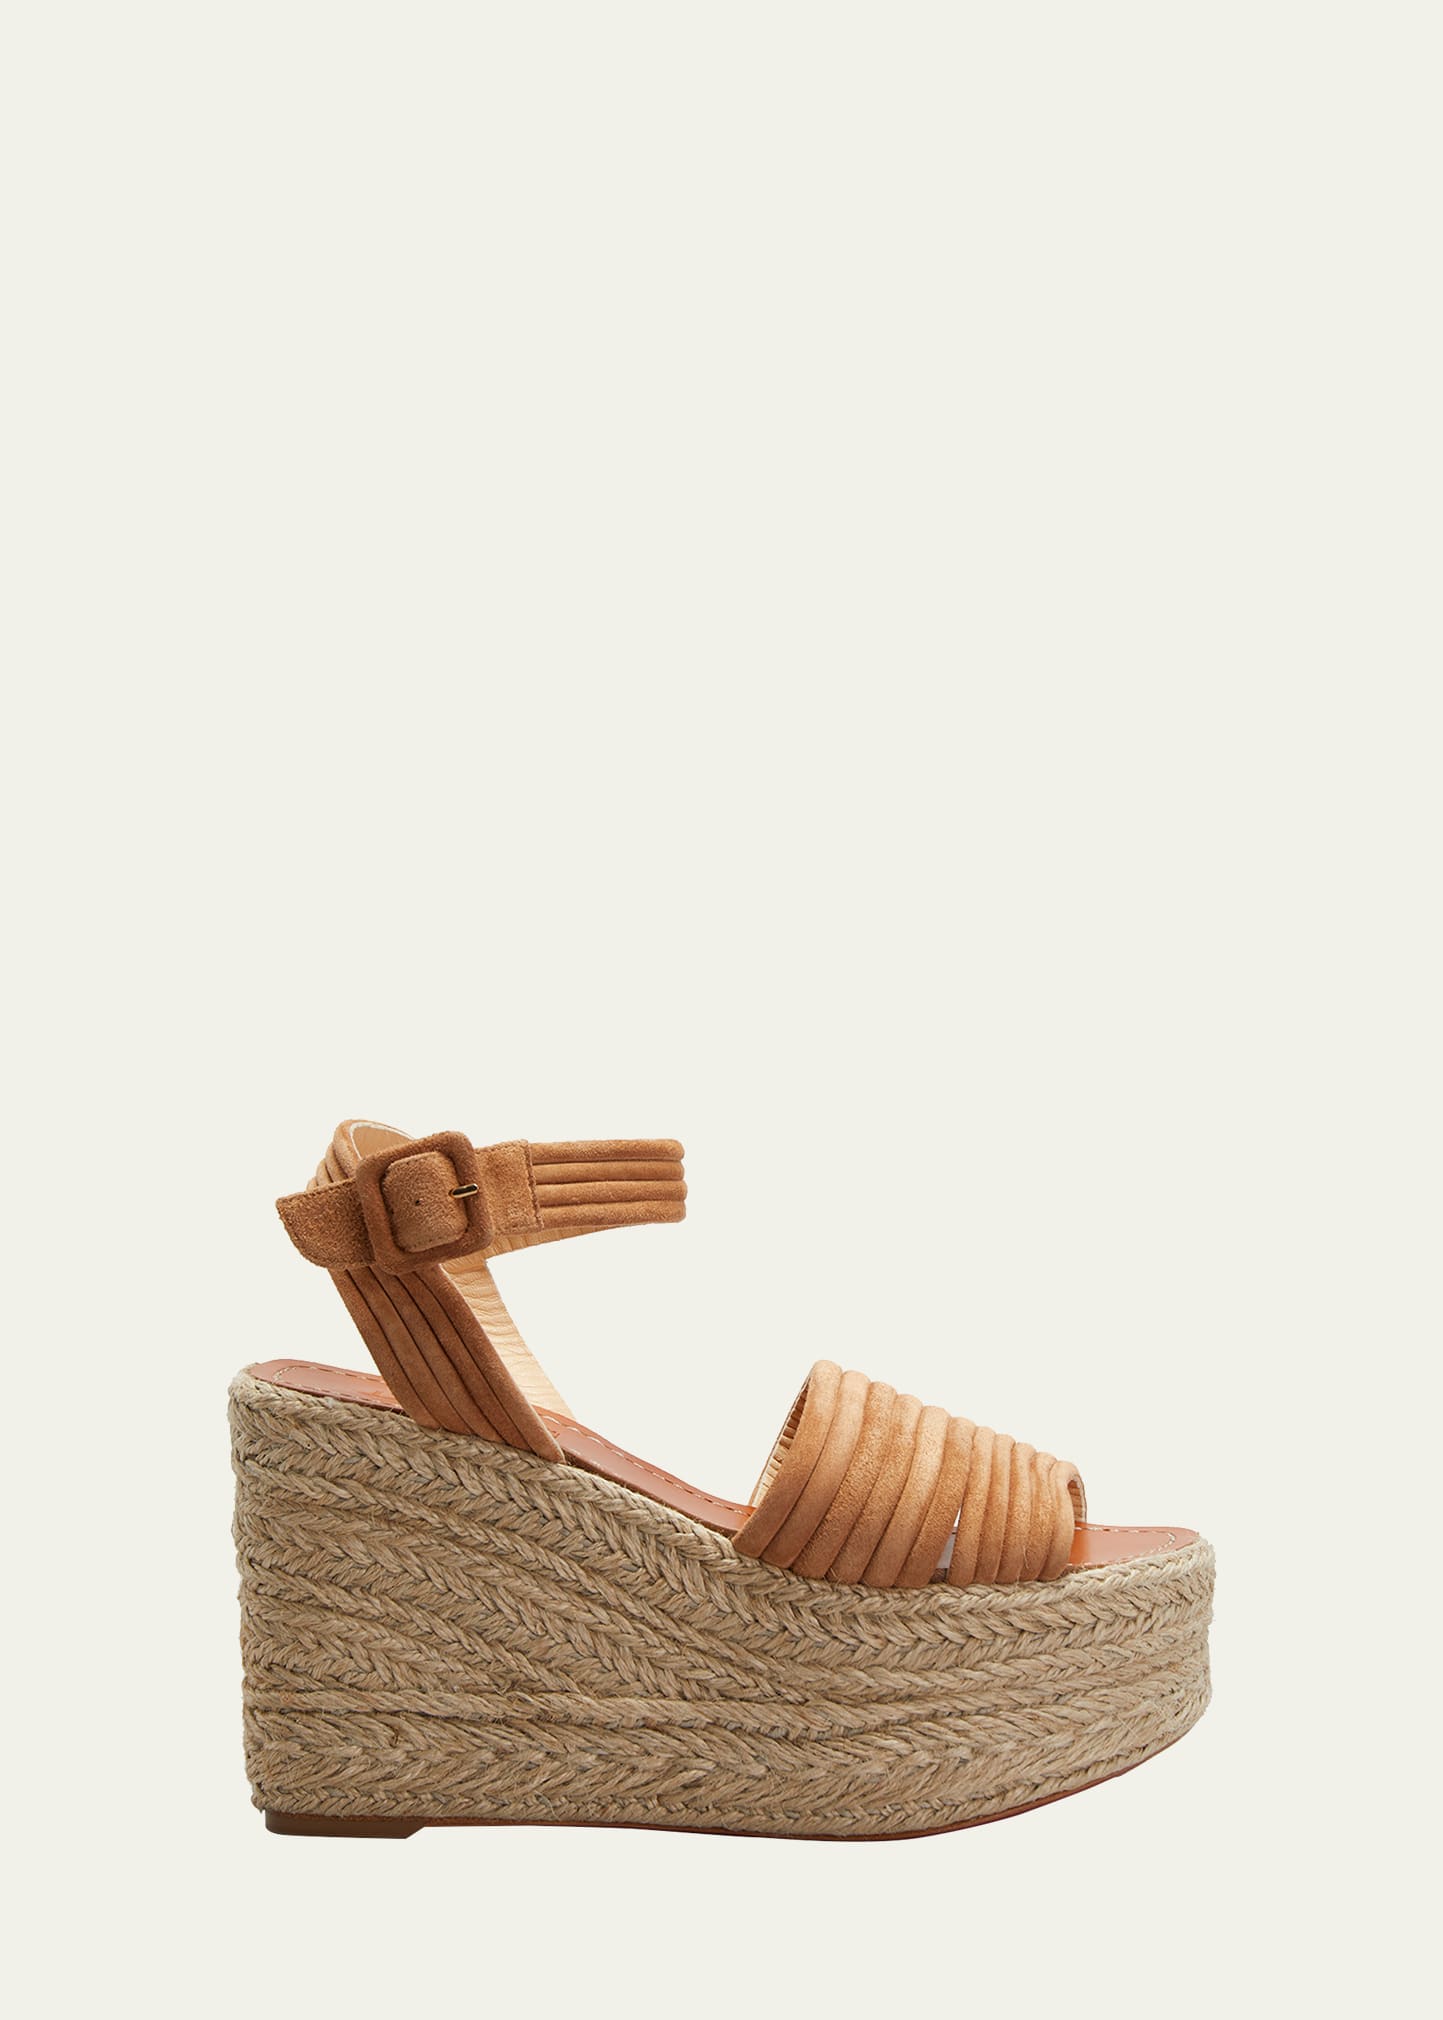 Christian Louboutin Manola Suede Ankle-Strap Wedge Espadrilles